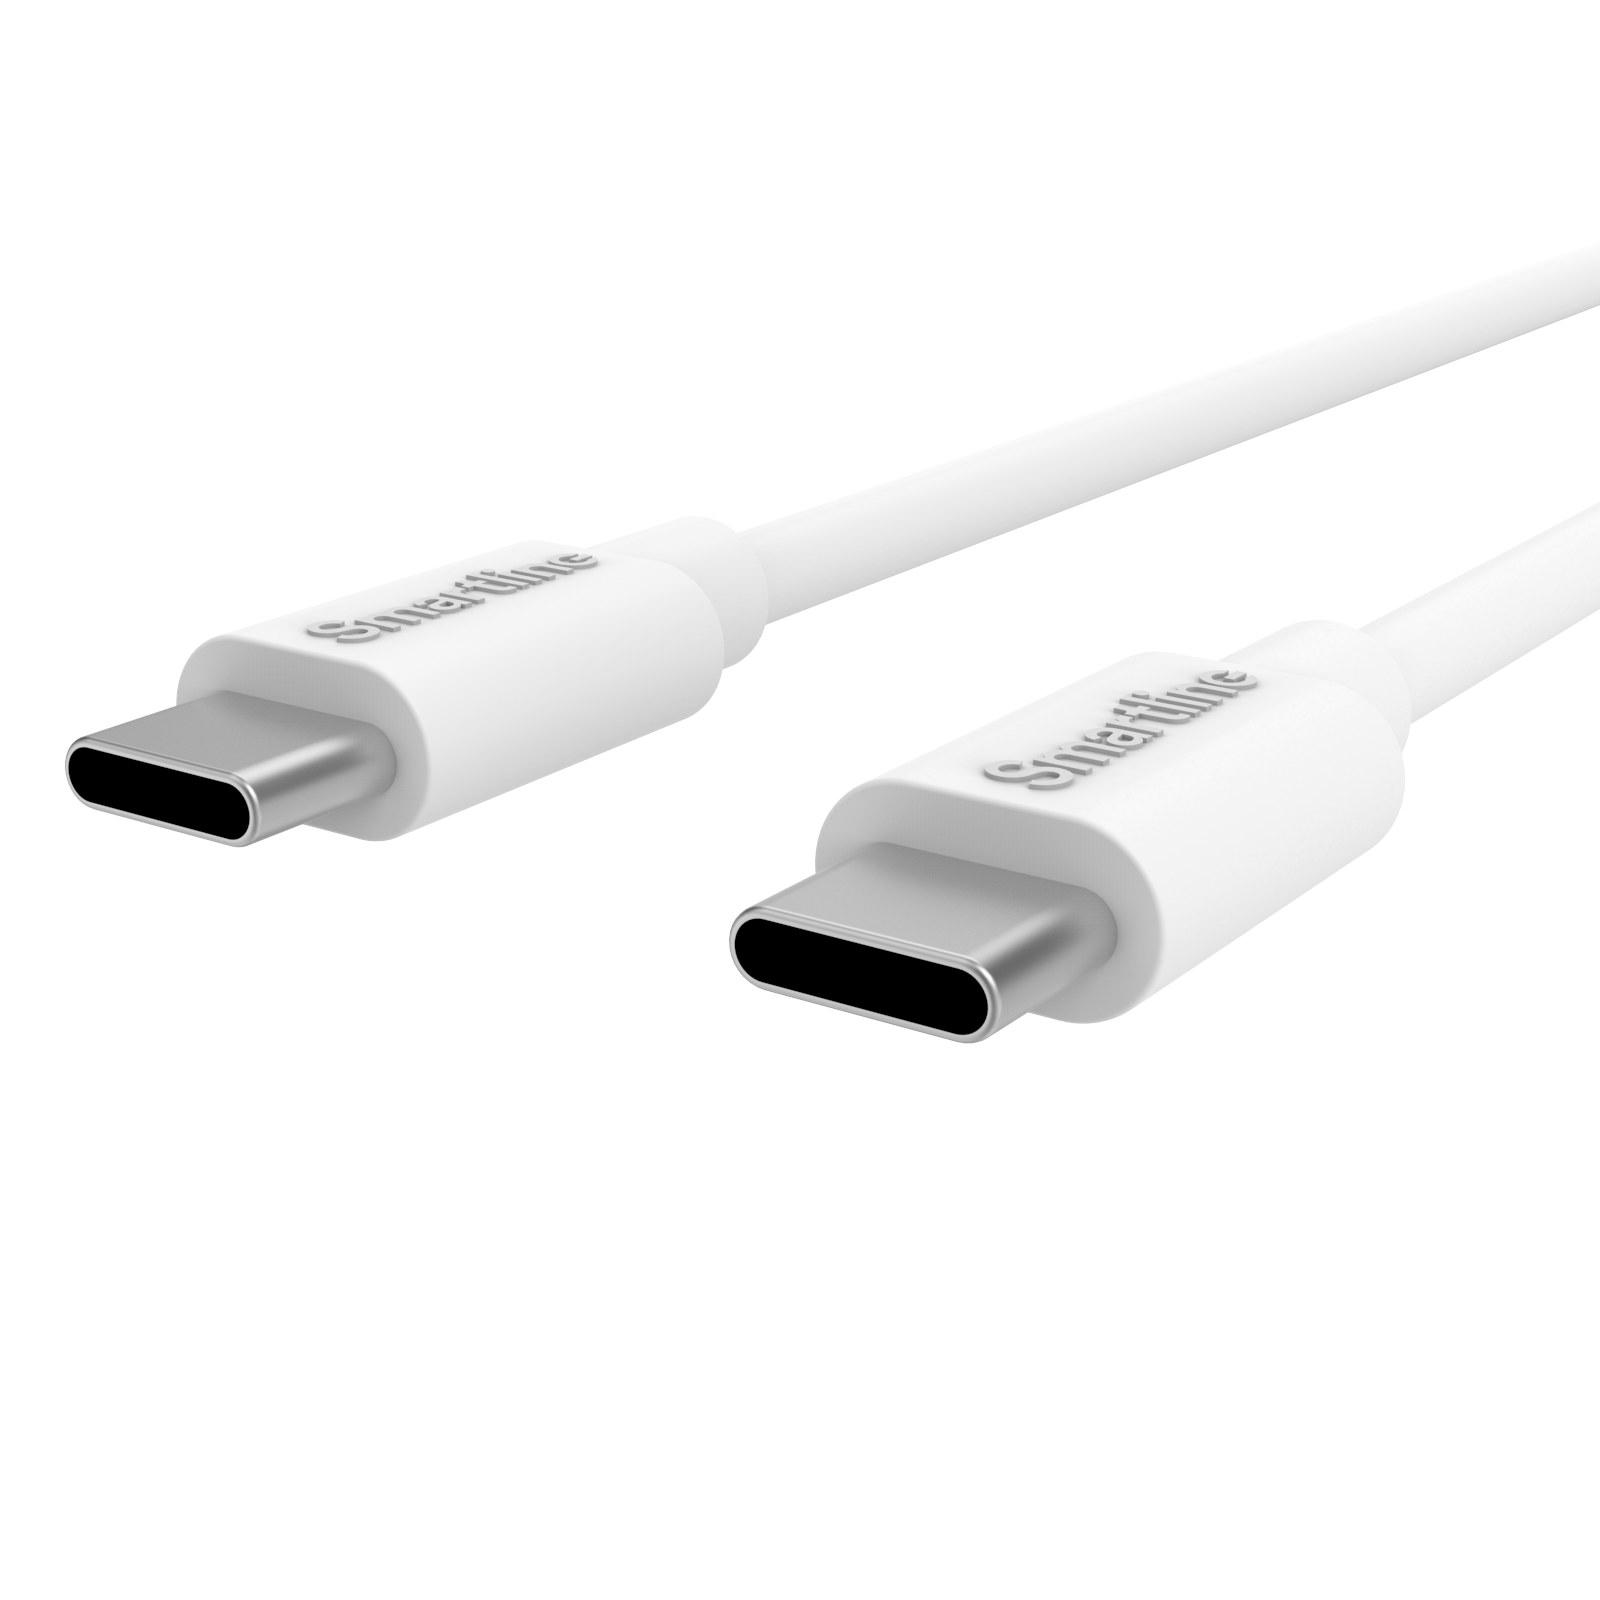 Complete Charger for Google Pixel - 2m Cable and Wall Charger USB-C - Smartline